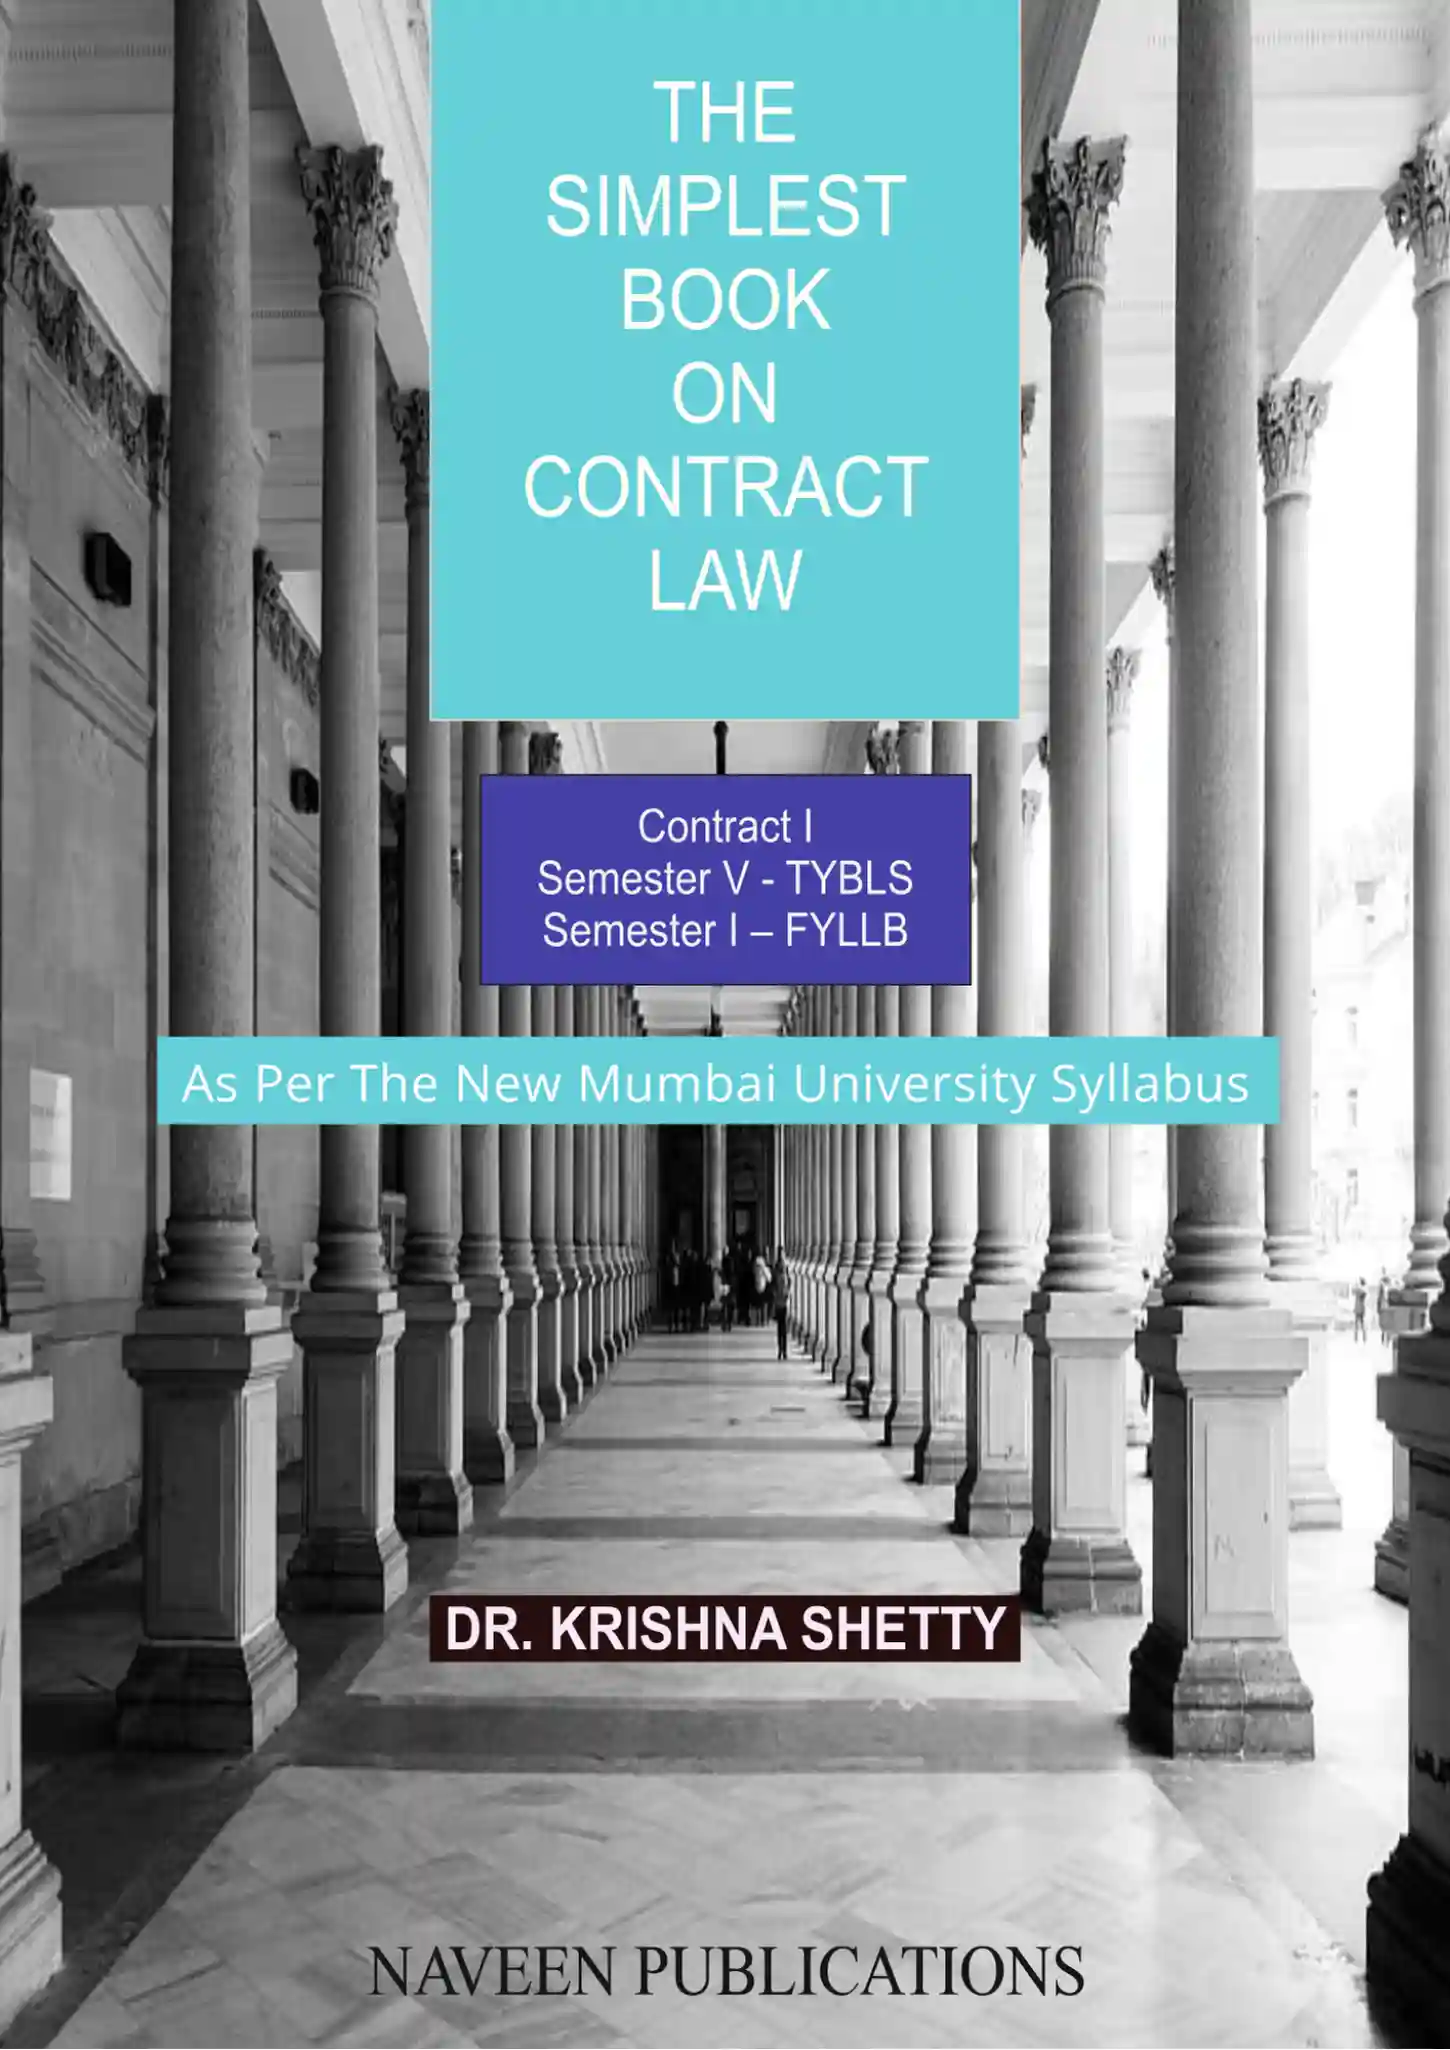 The Simplest Book on Contract Law